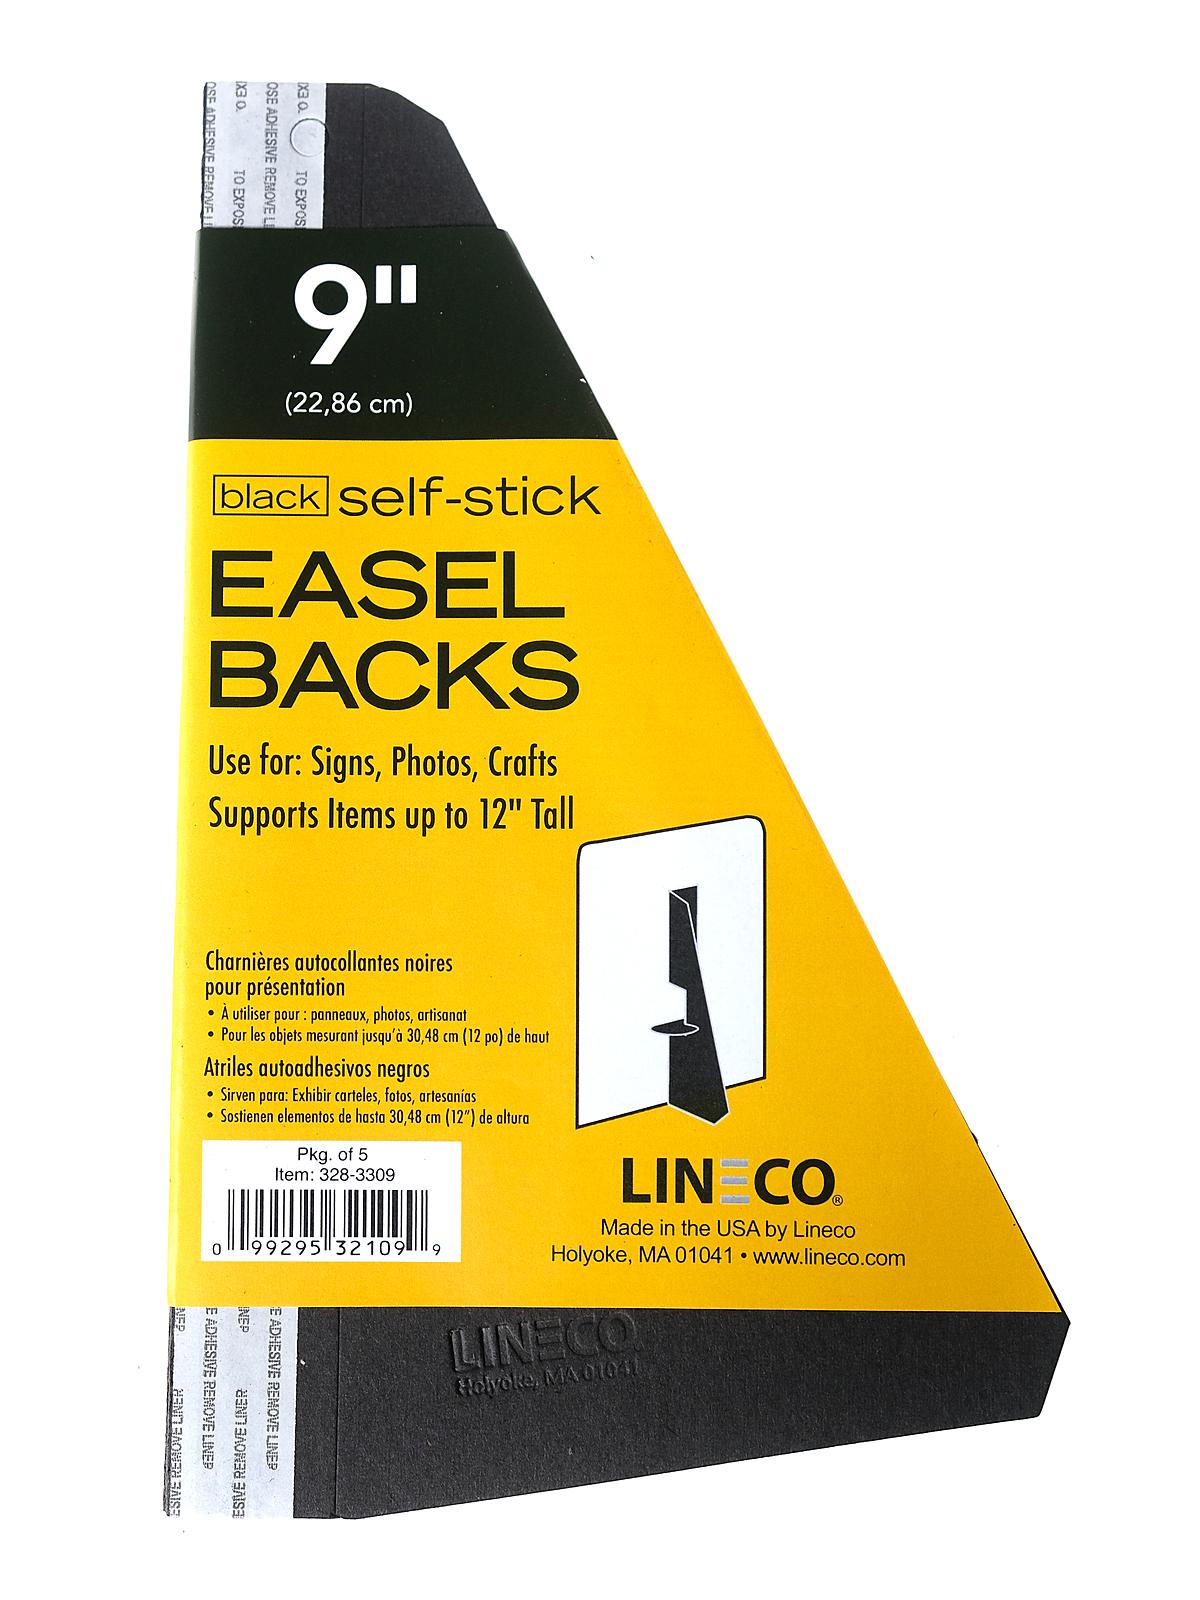 Lineco Self Stick Easel Backs 12 in white pack of 25